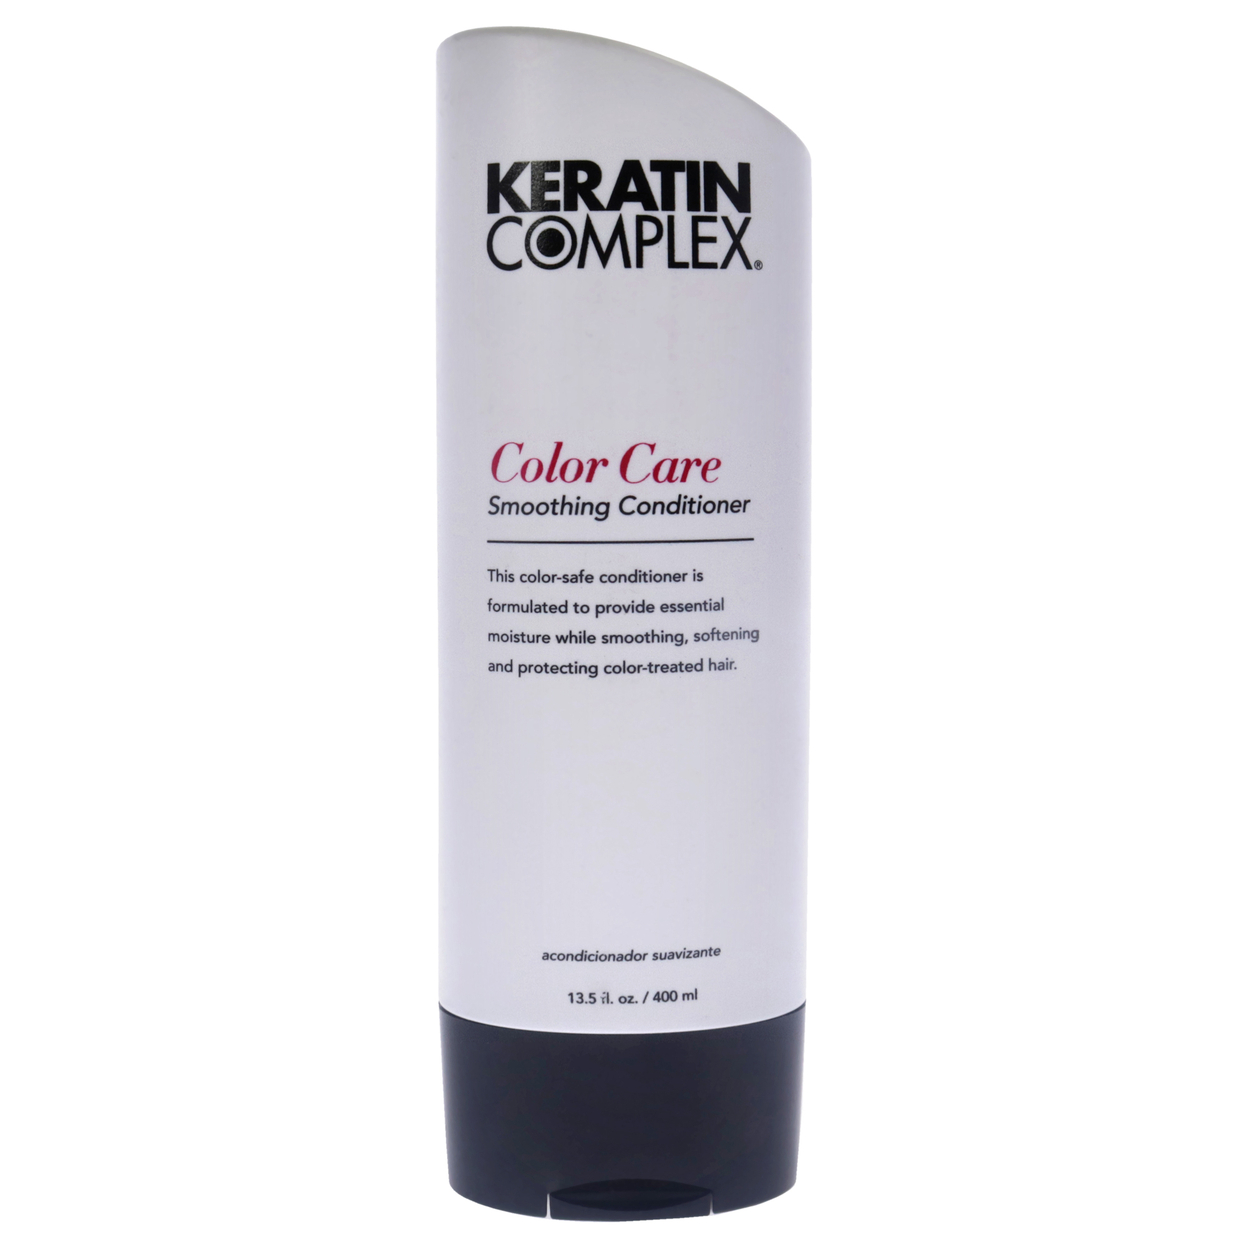 Keratin Complex Unisex HAIRCARE Keratin Color Care Smoothing Conditioner 13.5 Oz